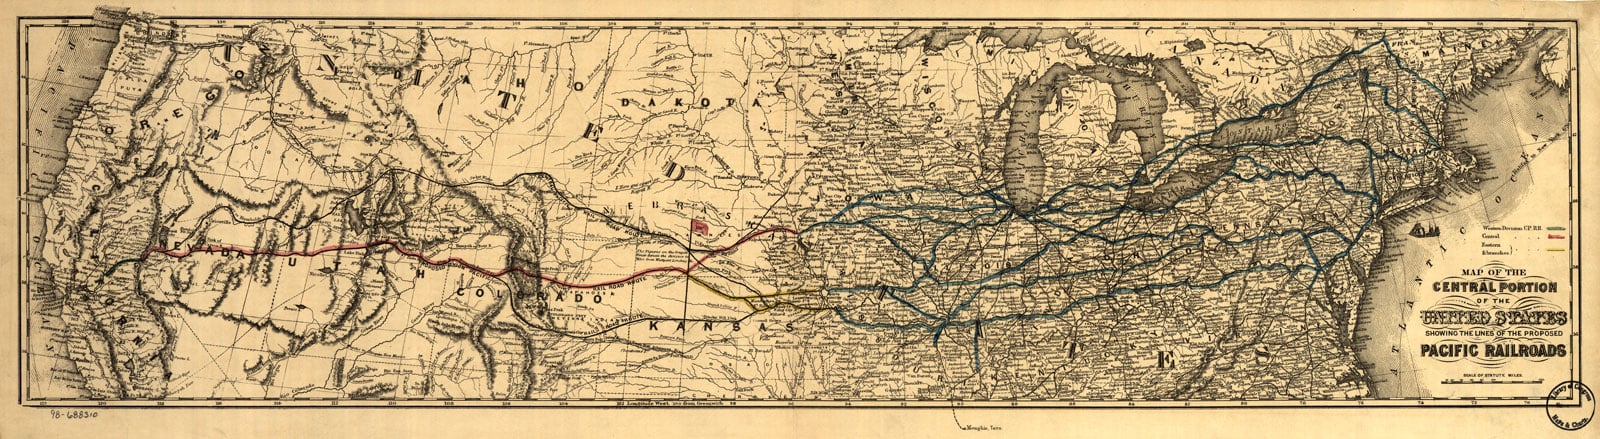 Map of the Central Portion of the United States Showing the Lines of the Proposed Pacific Railroads